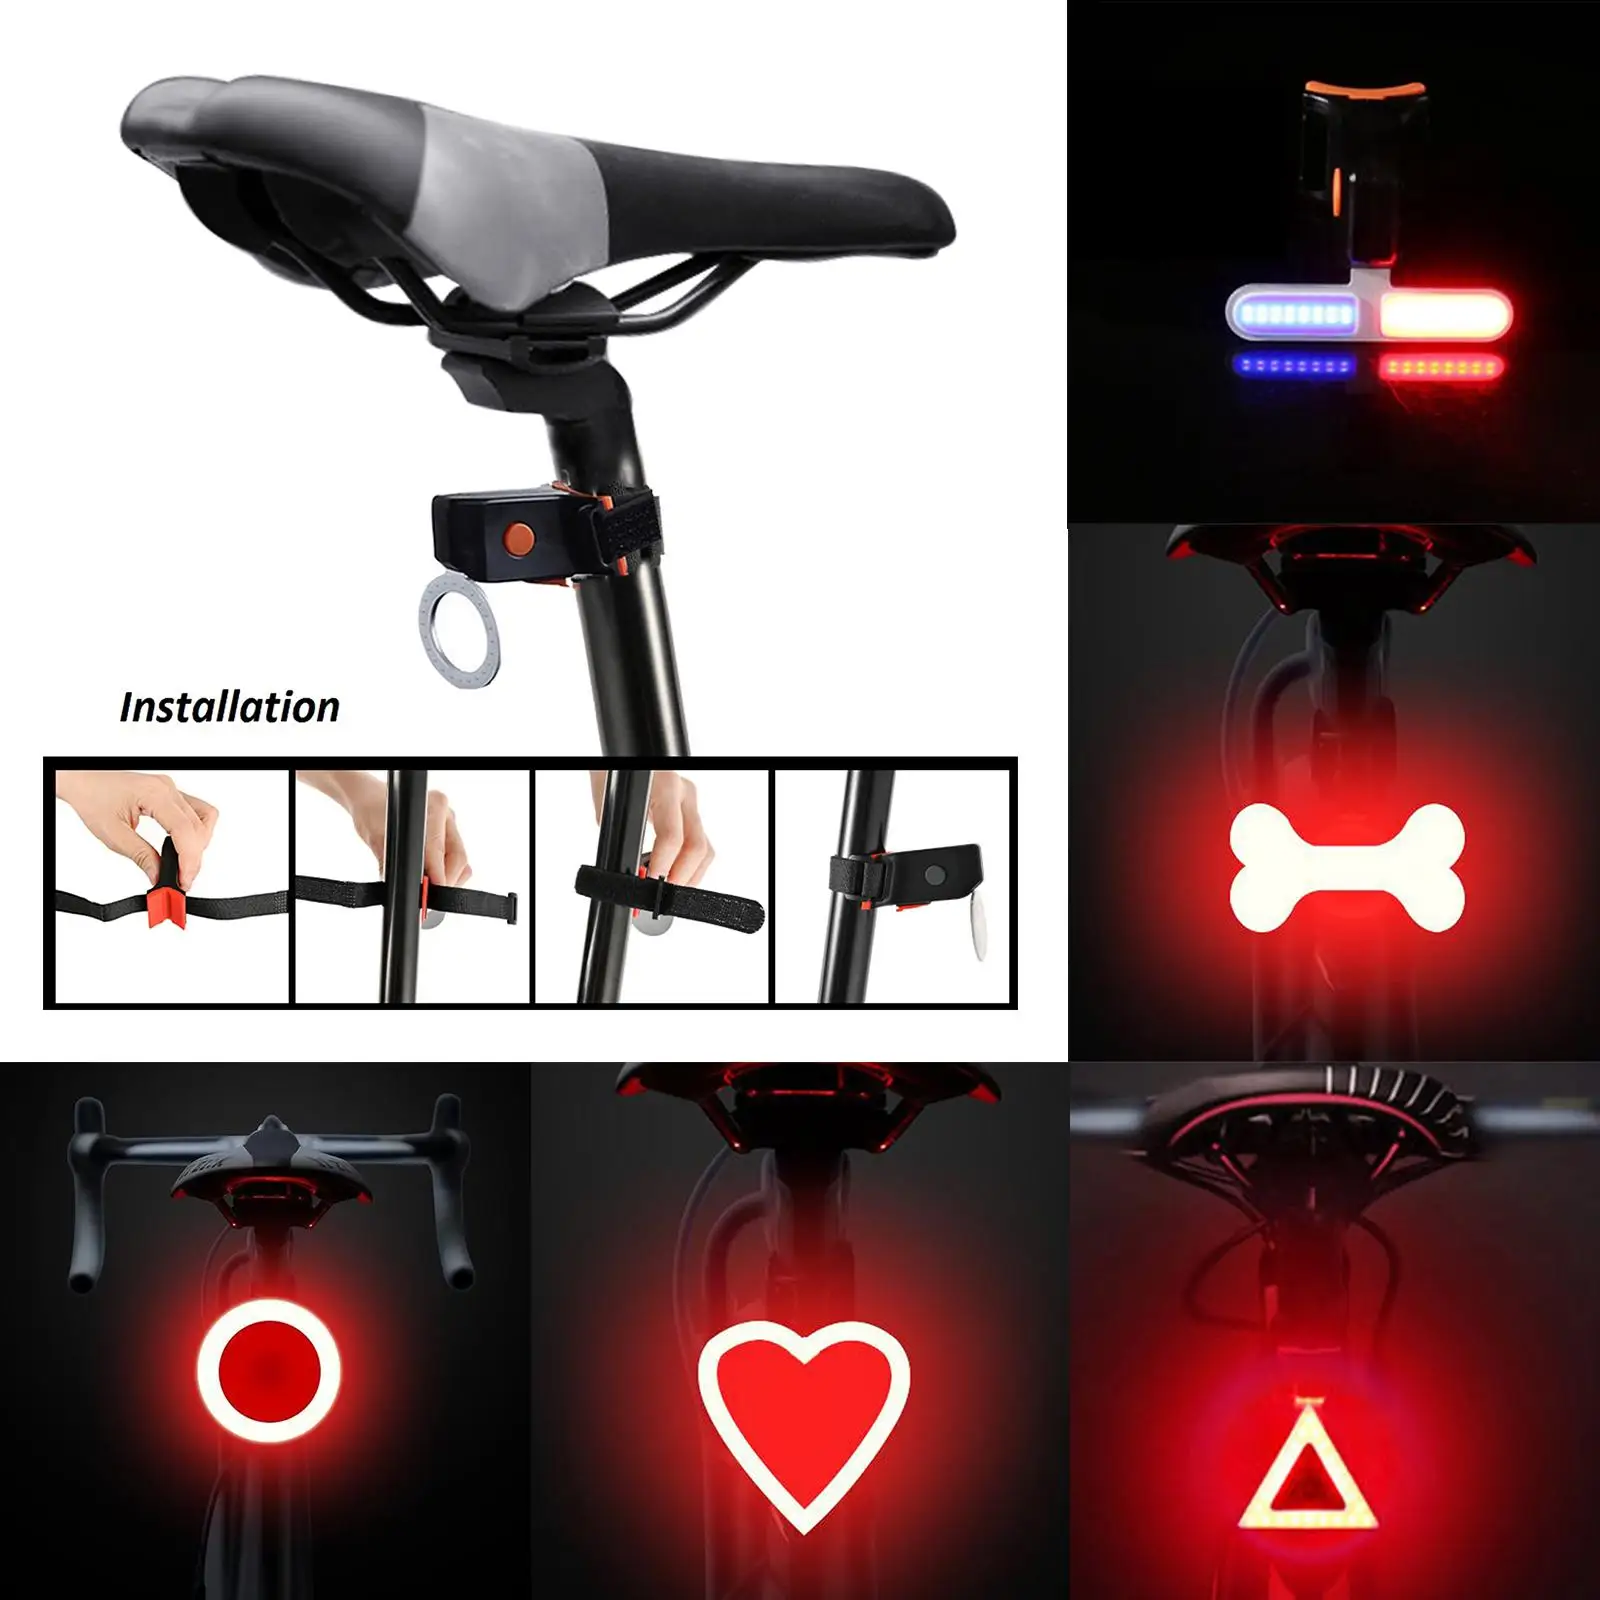 s.Lights, USB Rechargeable Rear Lights, 5 Brightness Modes, Mountains, , Children And 